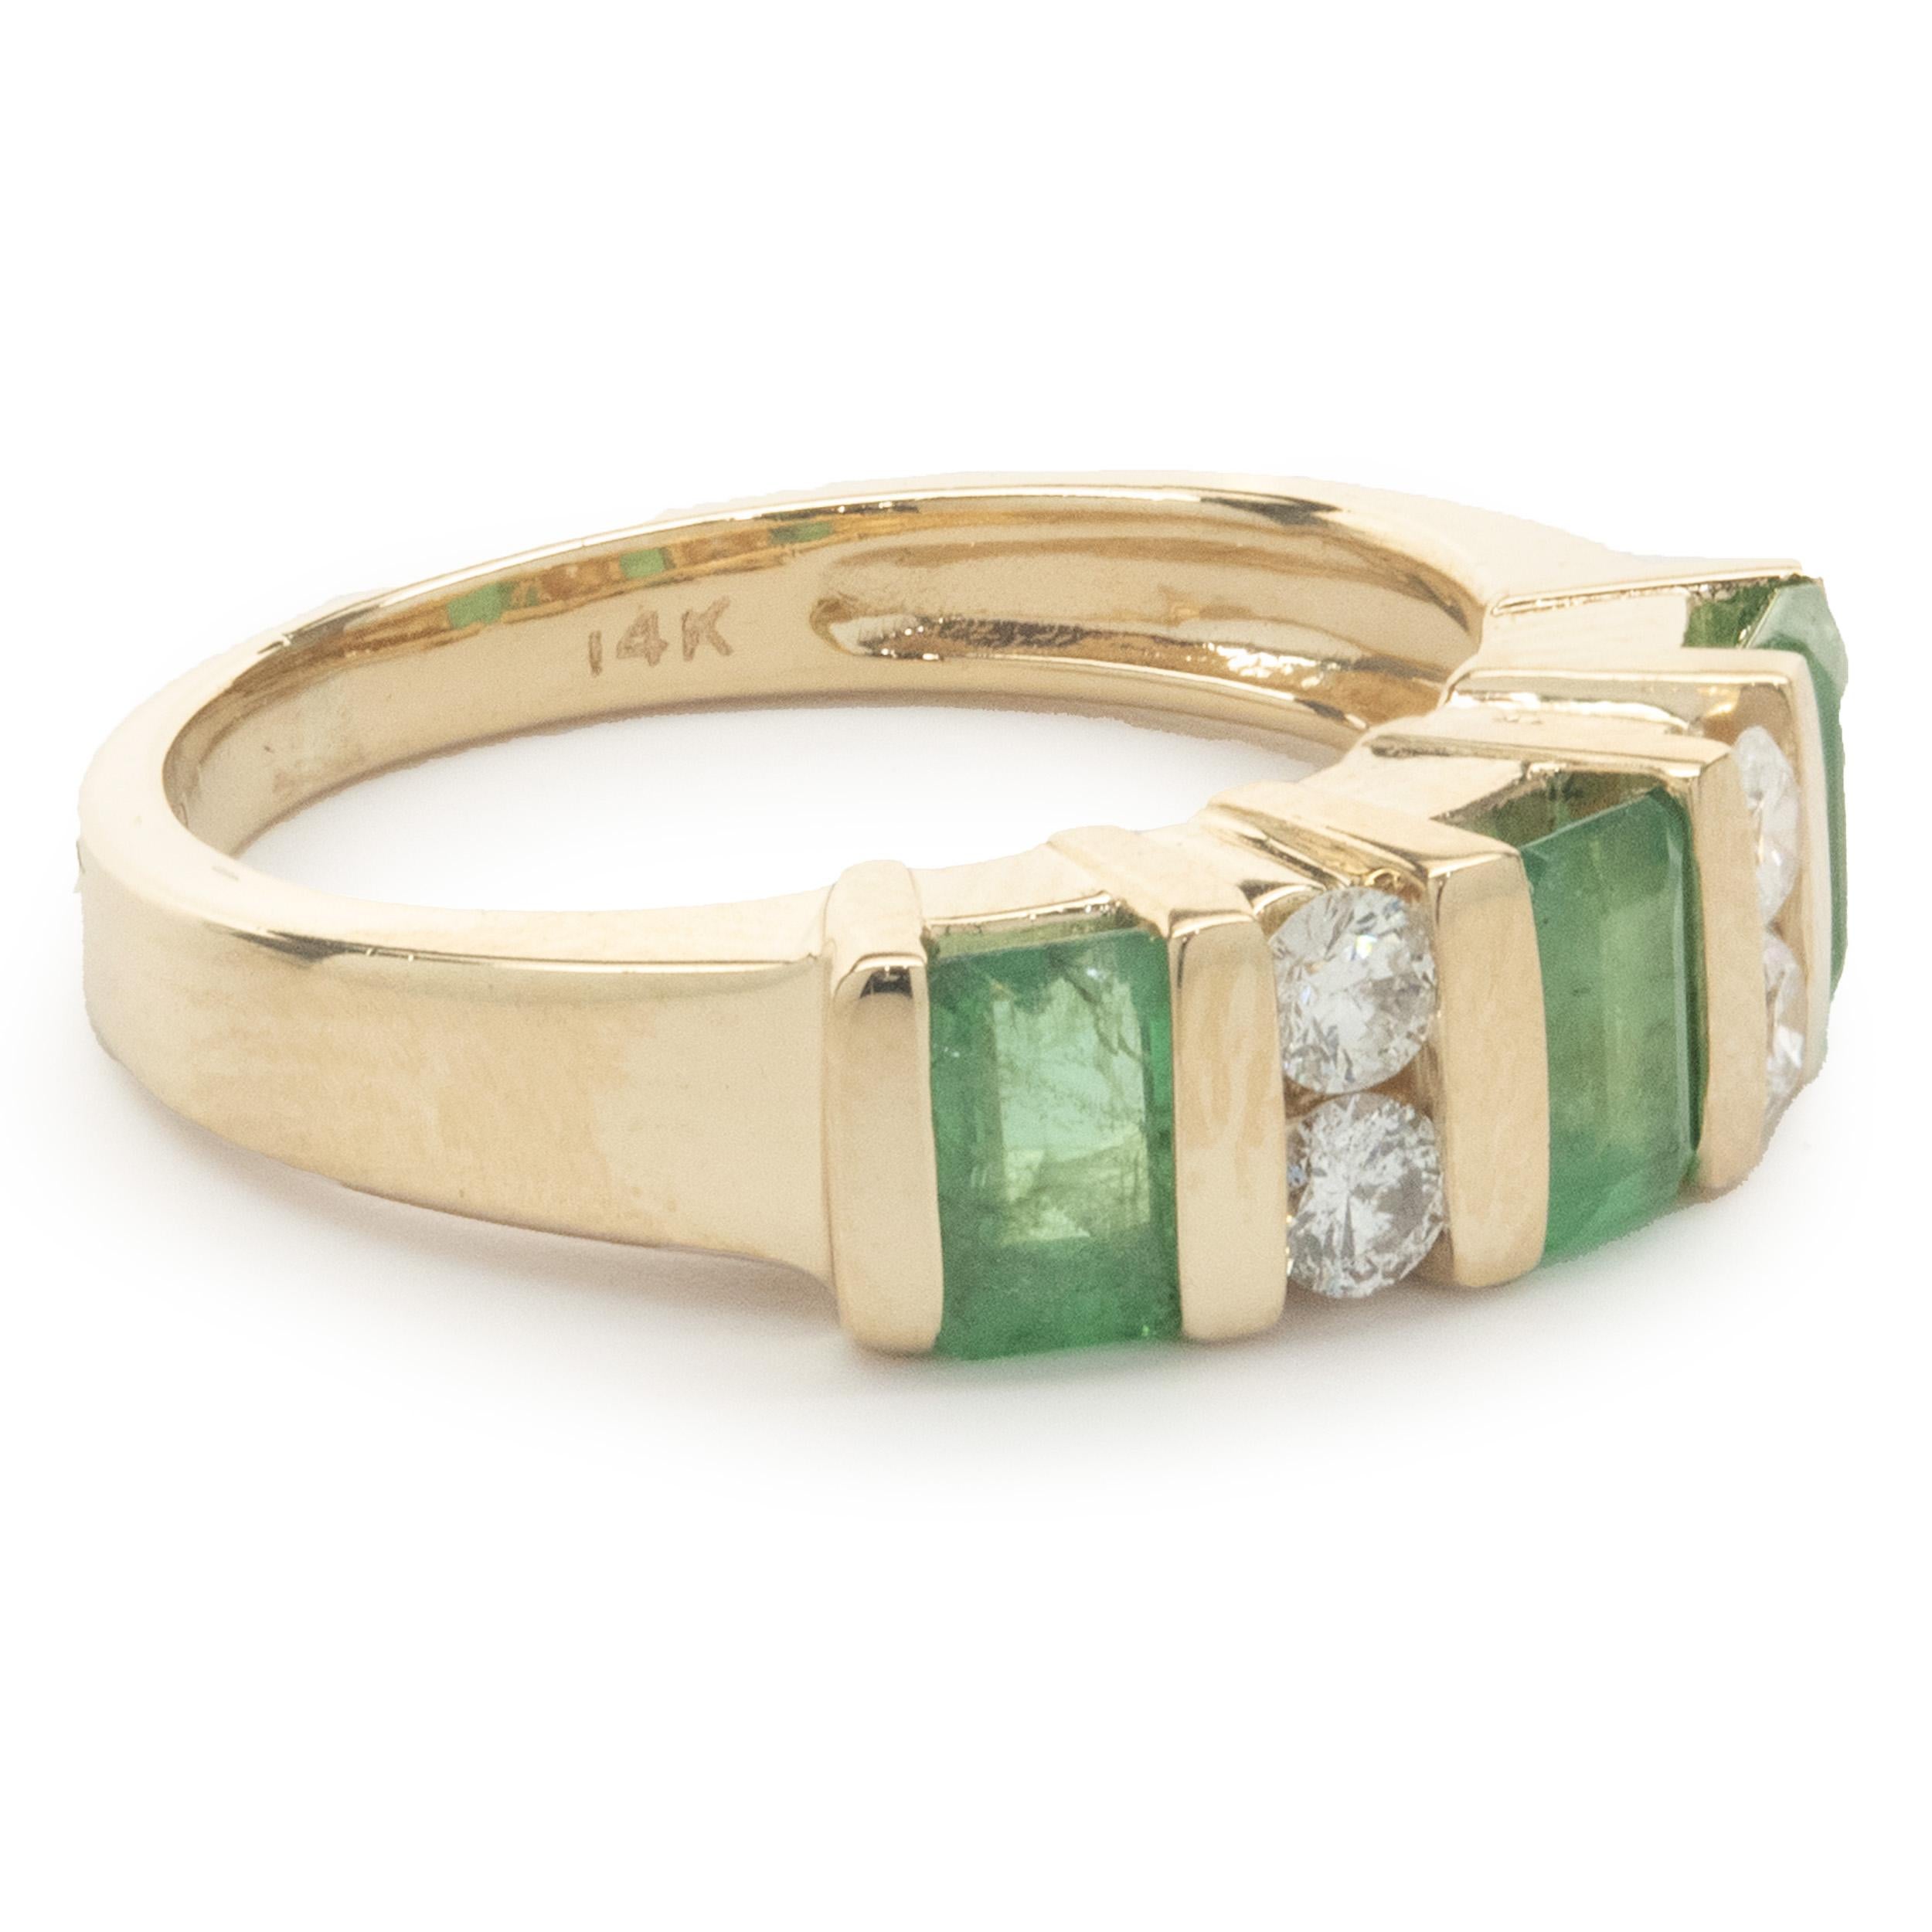 Designer: custom
Material: 14K yellow gold
Diamond: 4 round brilliant cut = 0.16cttw
Color: G
Clarity: SI1
Emerald: 3 baguette cut = 0.60cttw
Dimensions: ring top measures 5.4mm wide
Ring Size: 5 (complimentary sizing available)
Weight: 4.56 grams